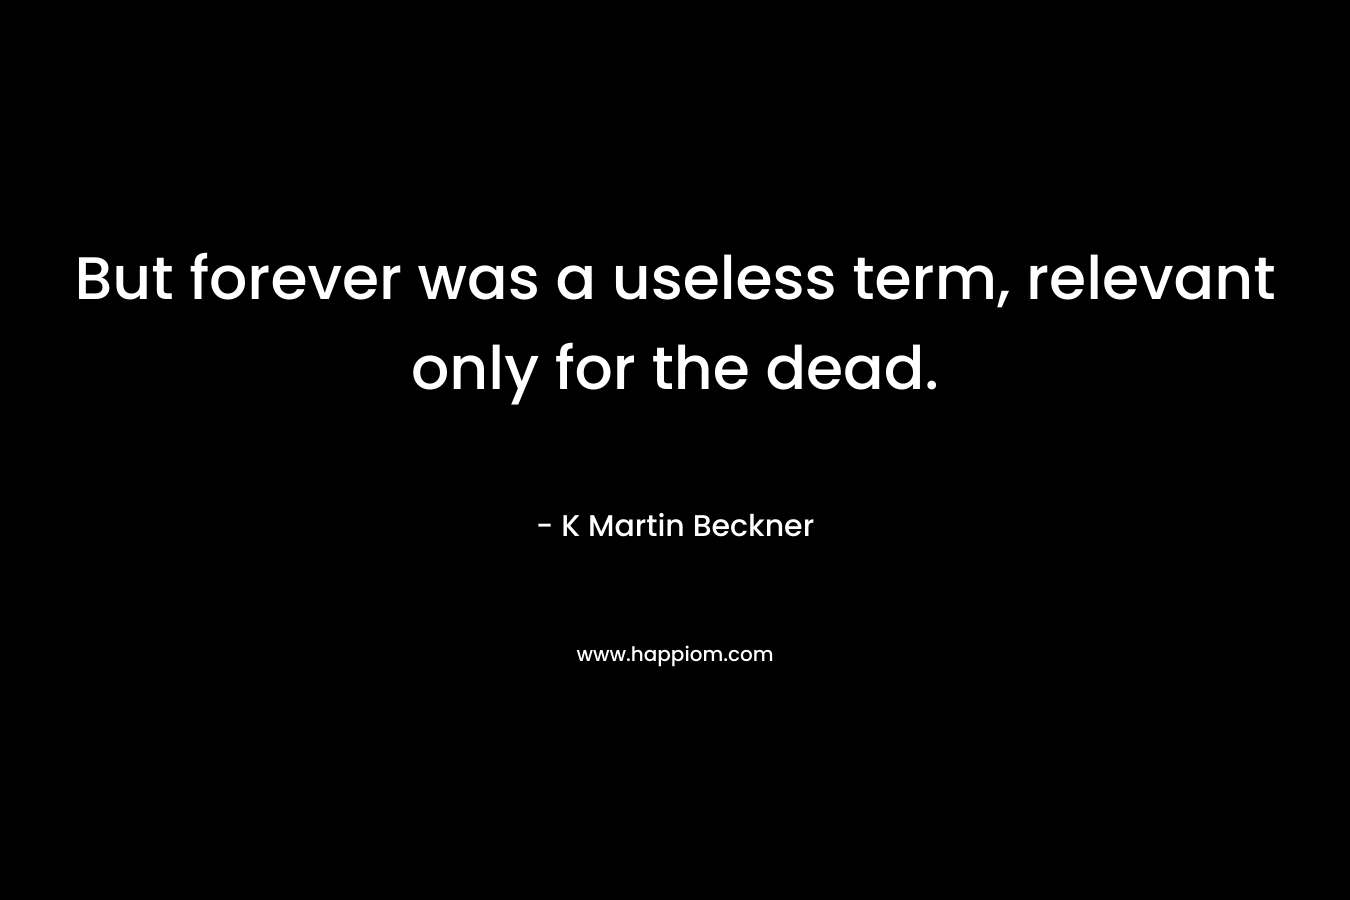 But forever was a useless term, relevant only for the dead.